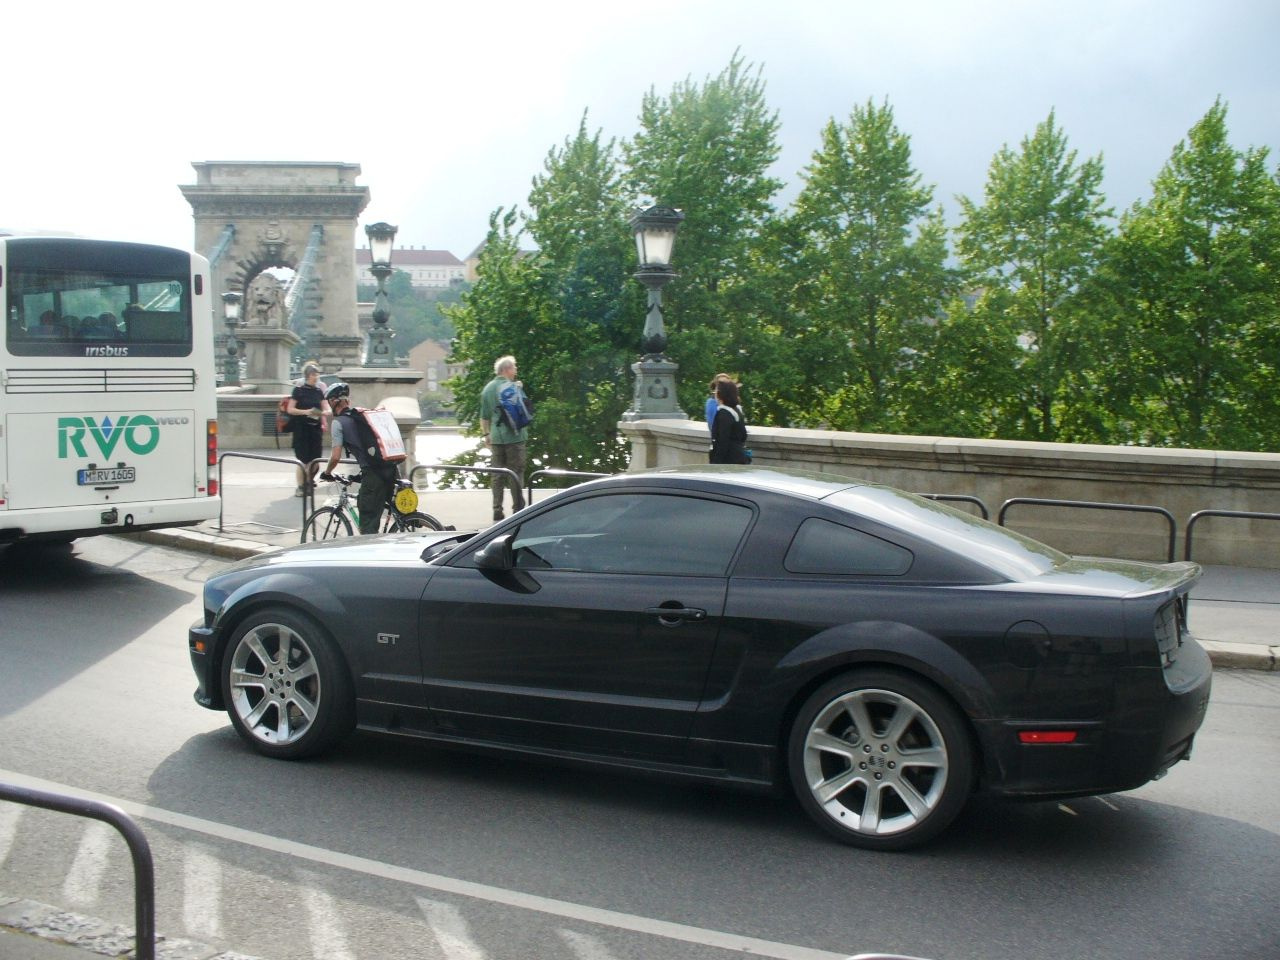 Saleen S281 (Ford Mustang)